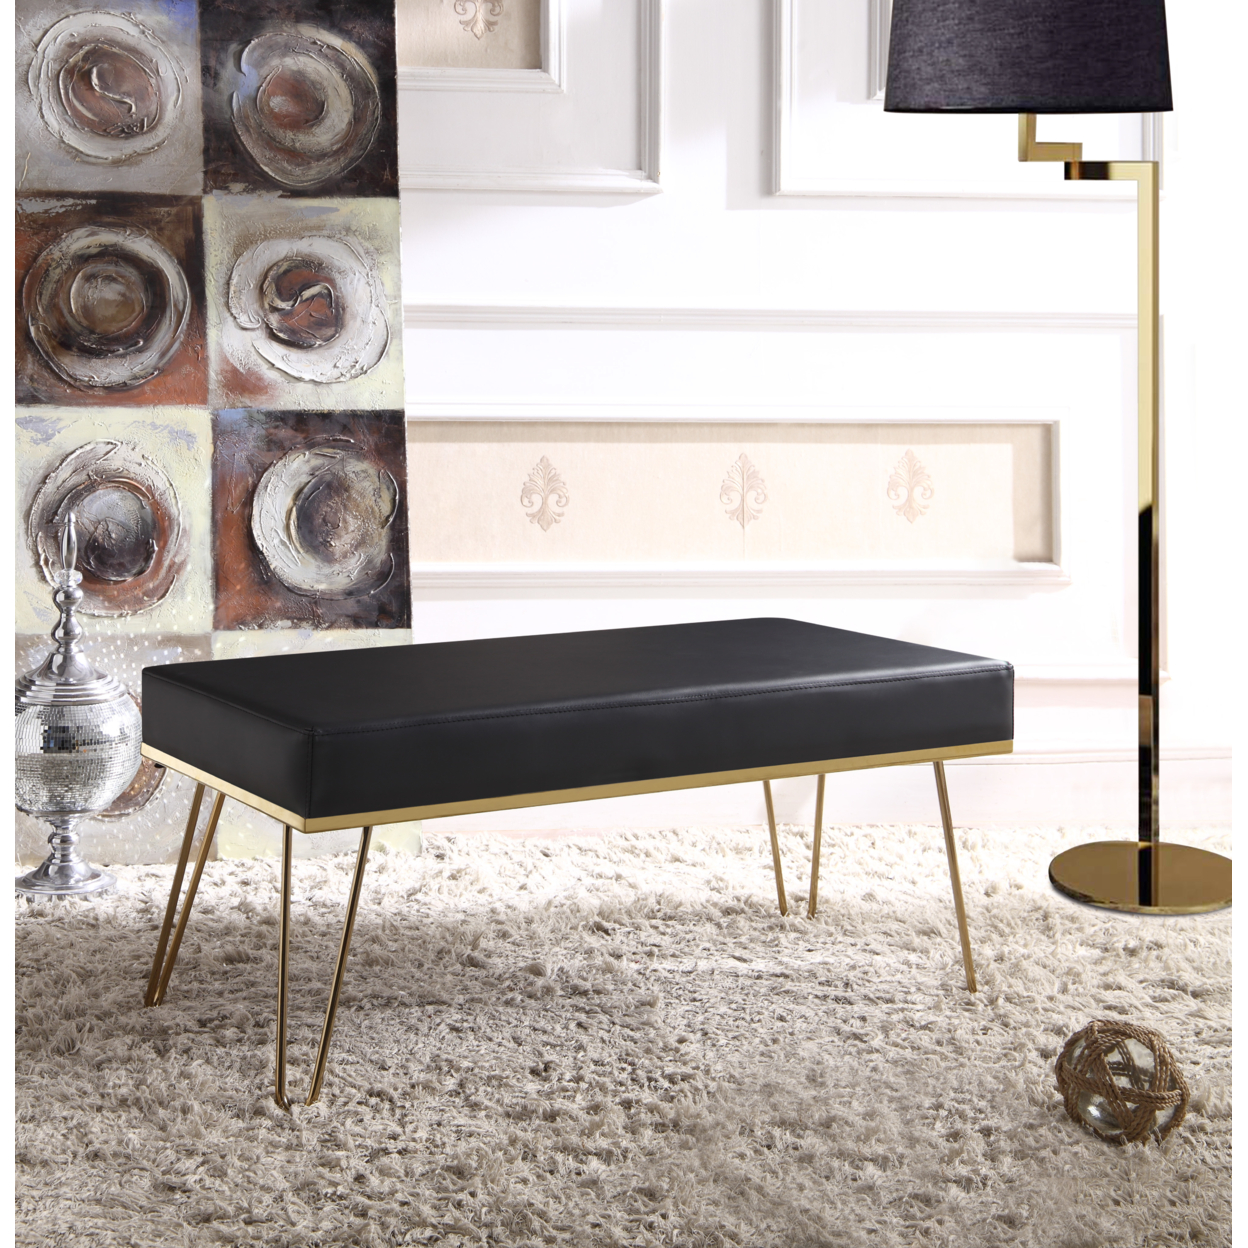 Aldon Bench PU Leather Upholstered Brass Finished Frame Hairpin Legs - Black